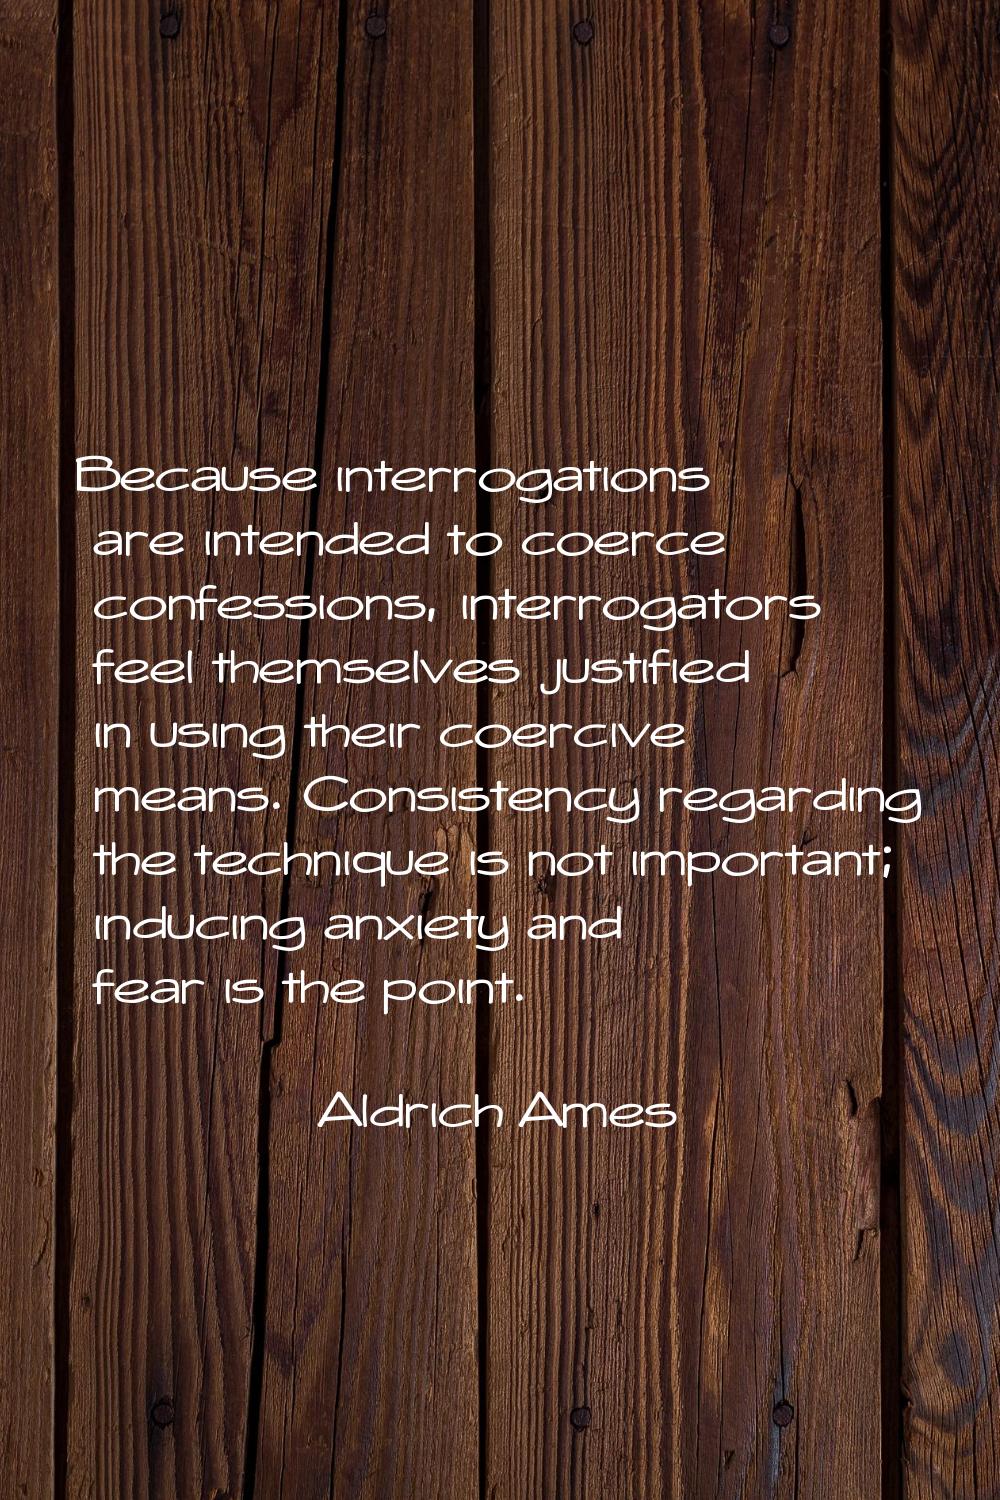 Because interrogations are intended to coerce confessions, interrogators feel themselves justified 